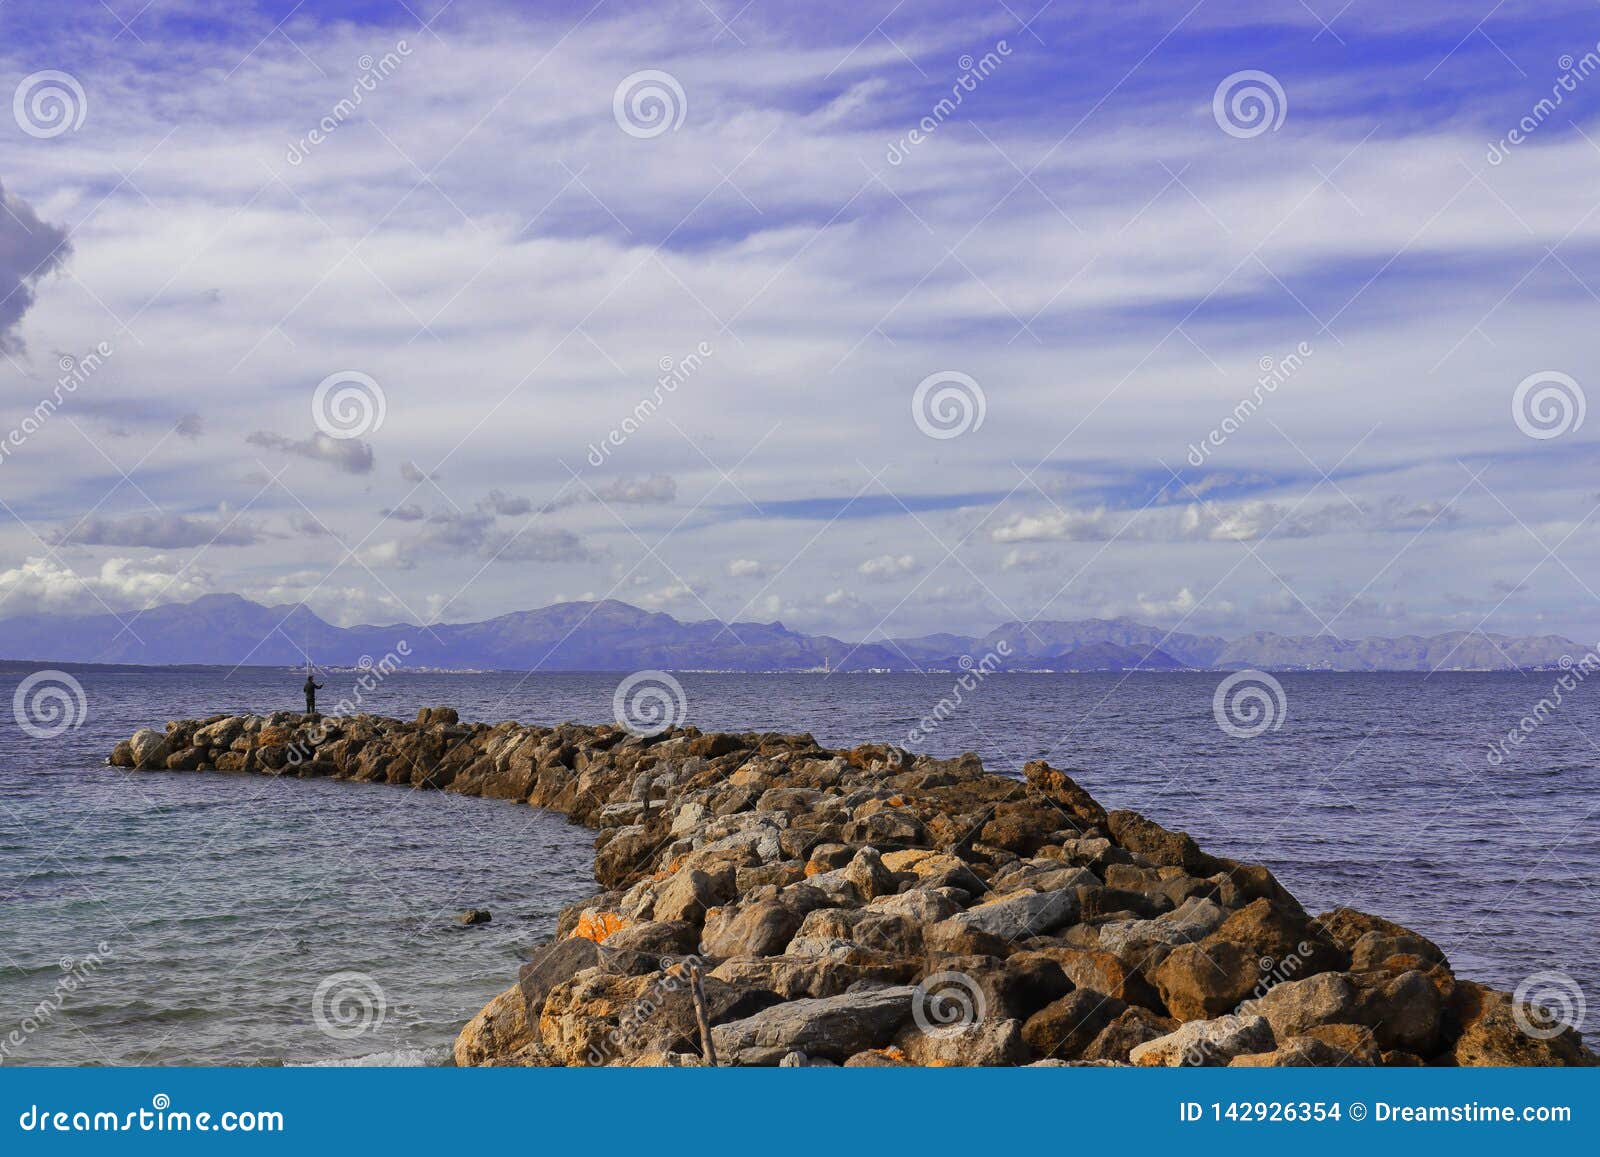 Jetty / Pier of Rocks with Man Fishing and Mountain Backdrop, Mediterranean  Sea, Mallorca, Spain Stock Photo - Image of nature, beautiful: 142926354